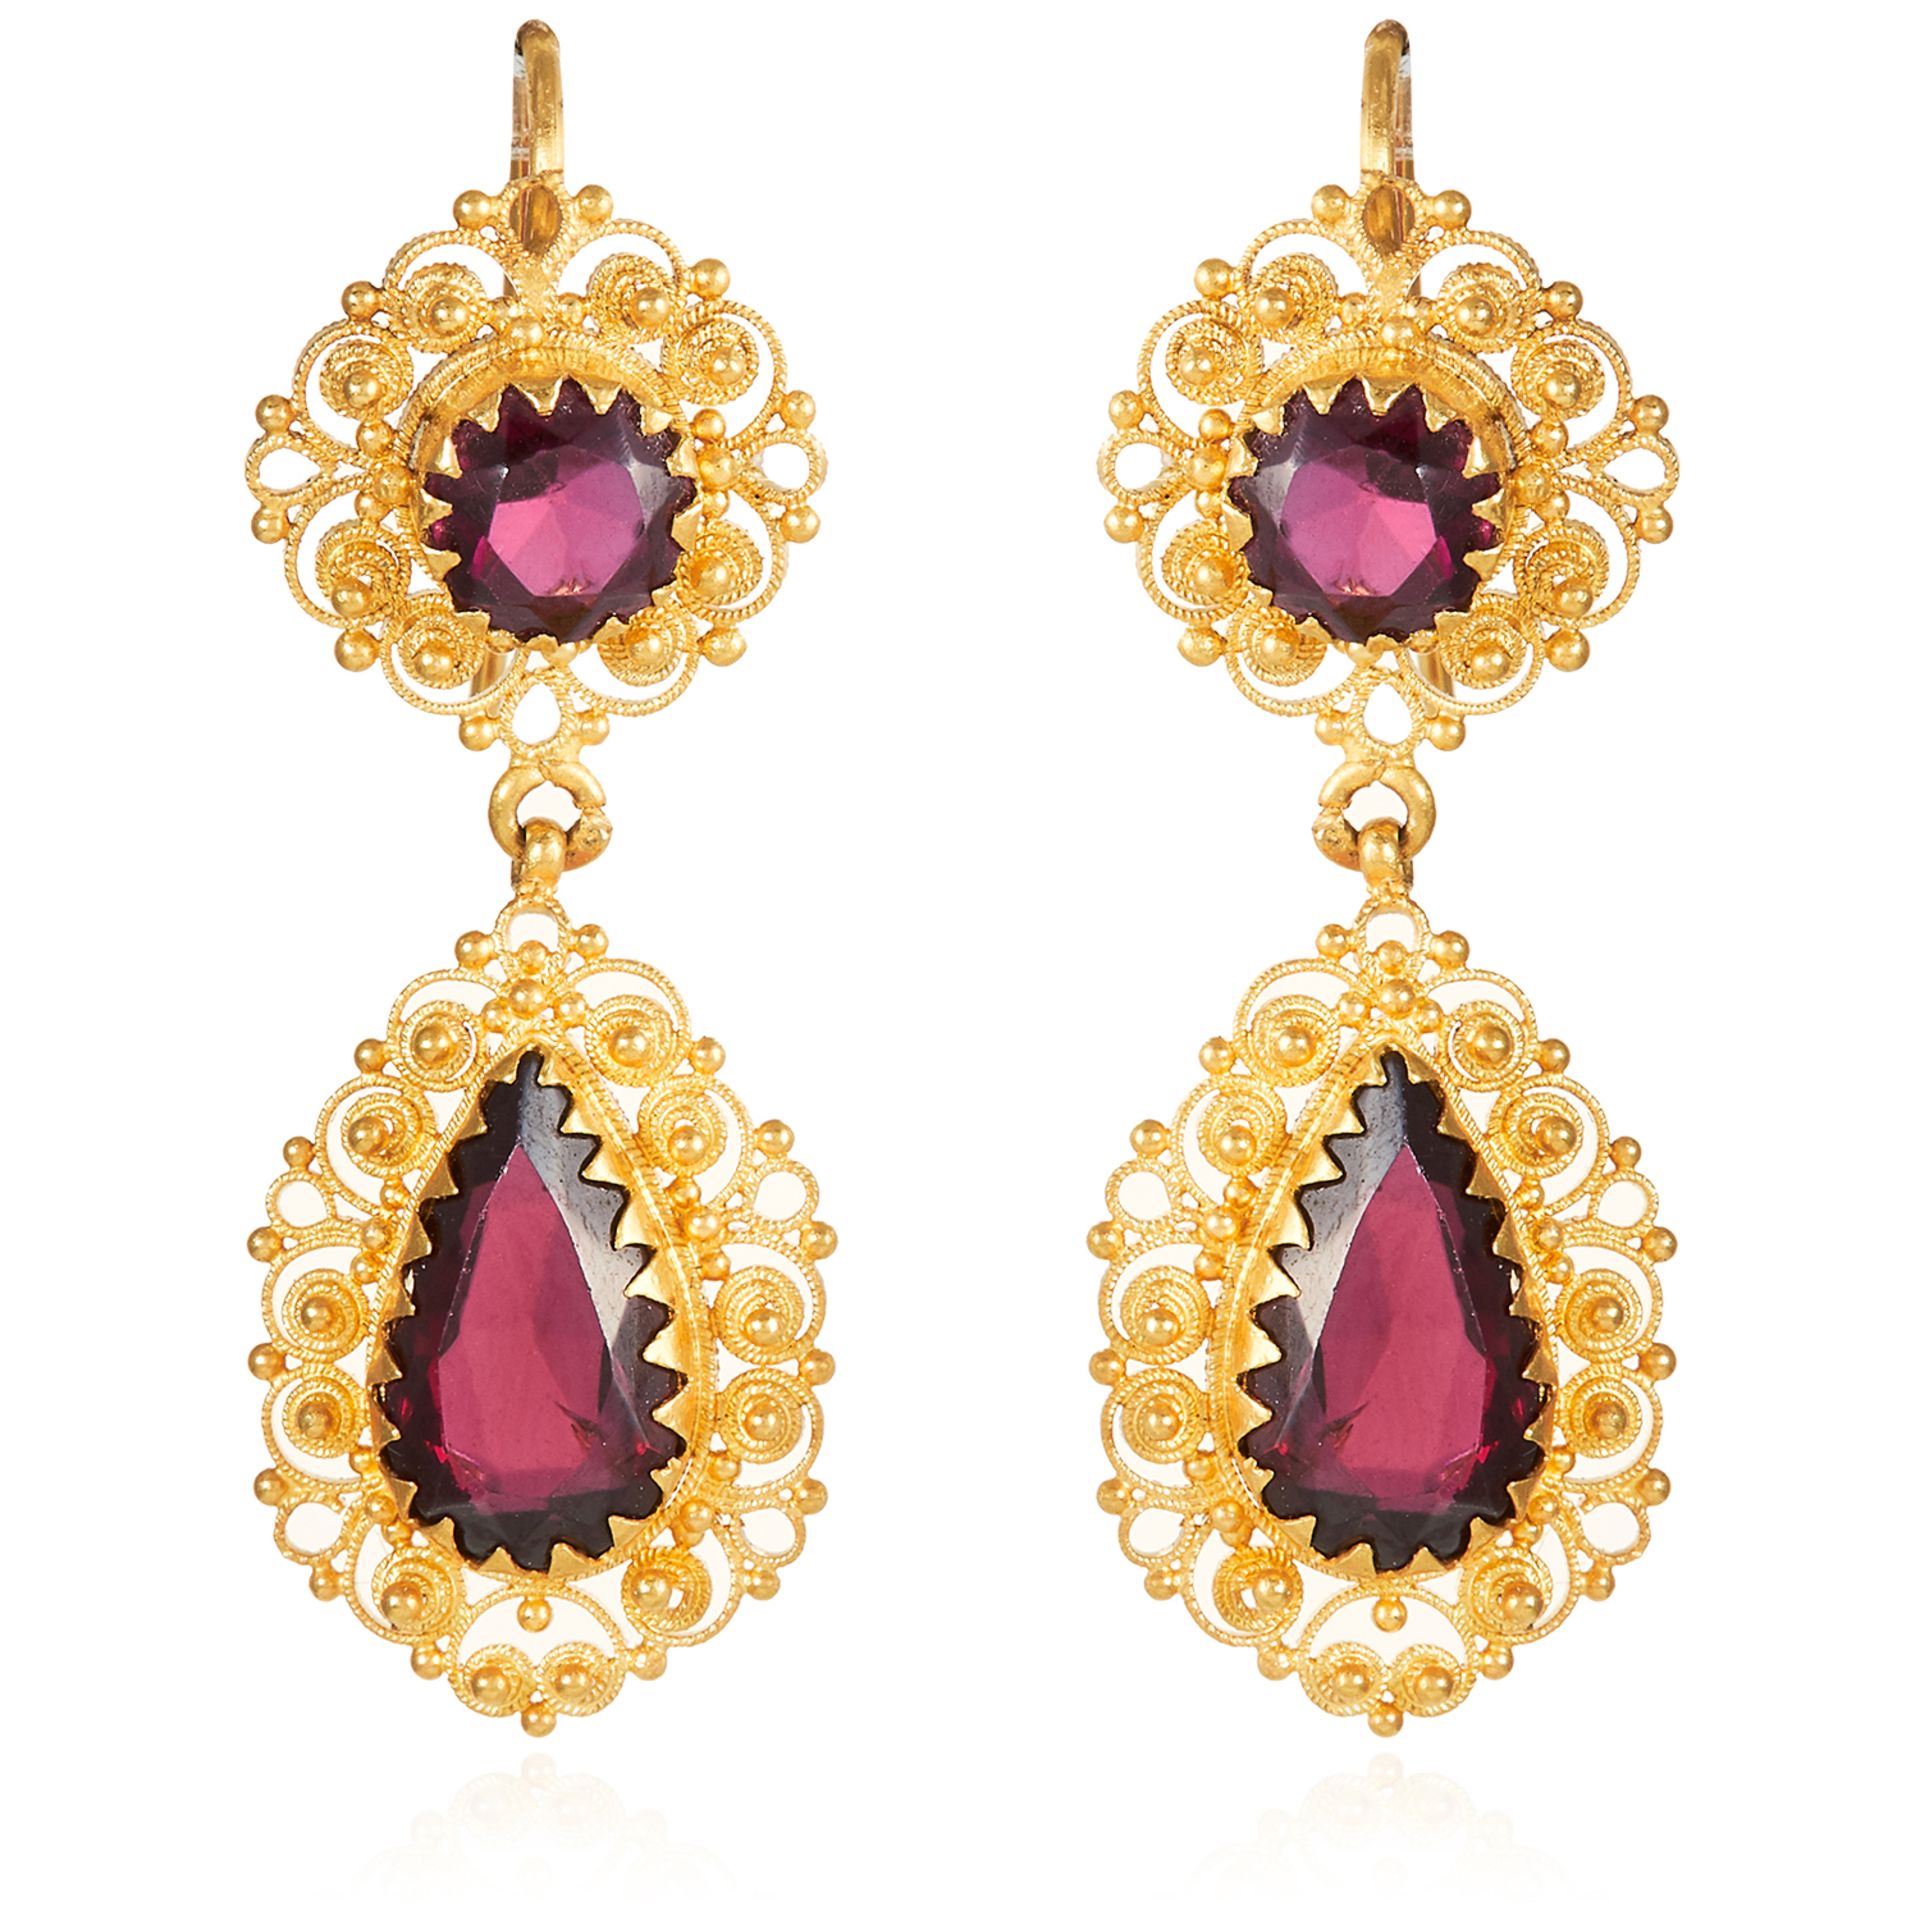 A PAIR OF ANTIQUE GARNET EARRINGS, 19TH CENTURY in high carat yellow gold, the pear and round cut